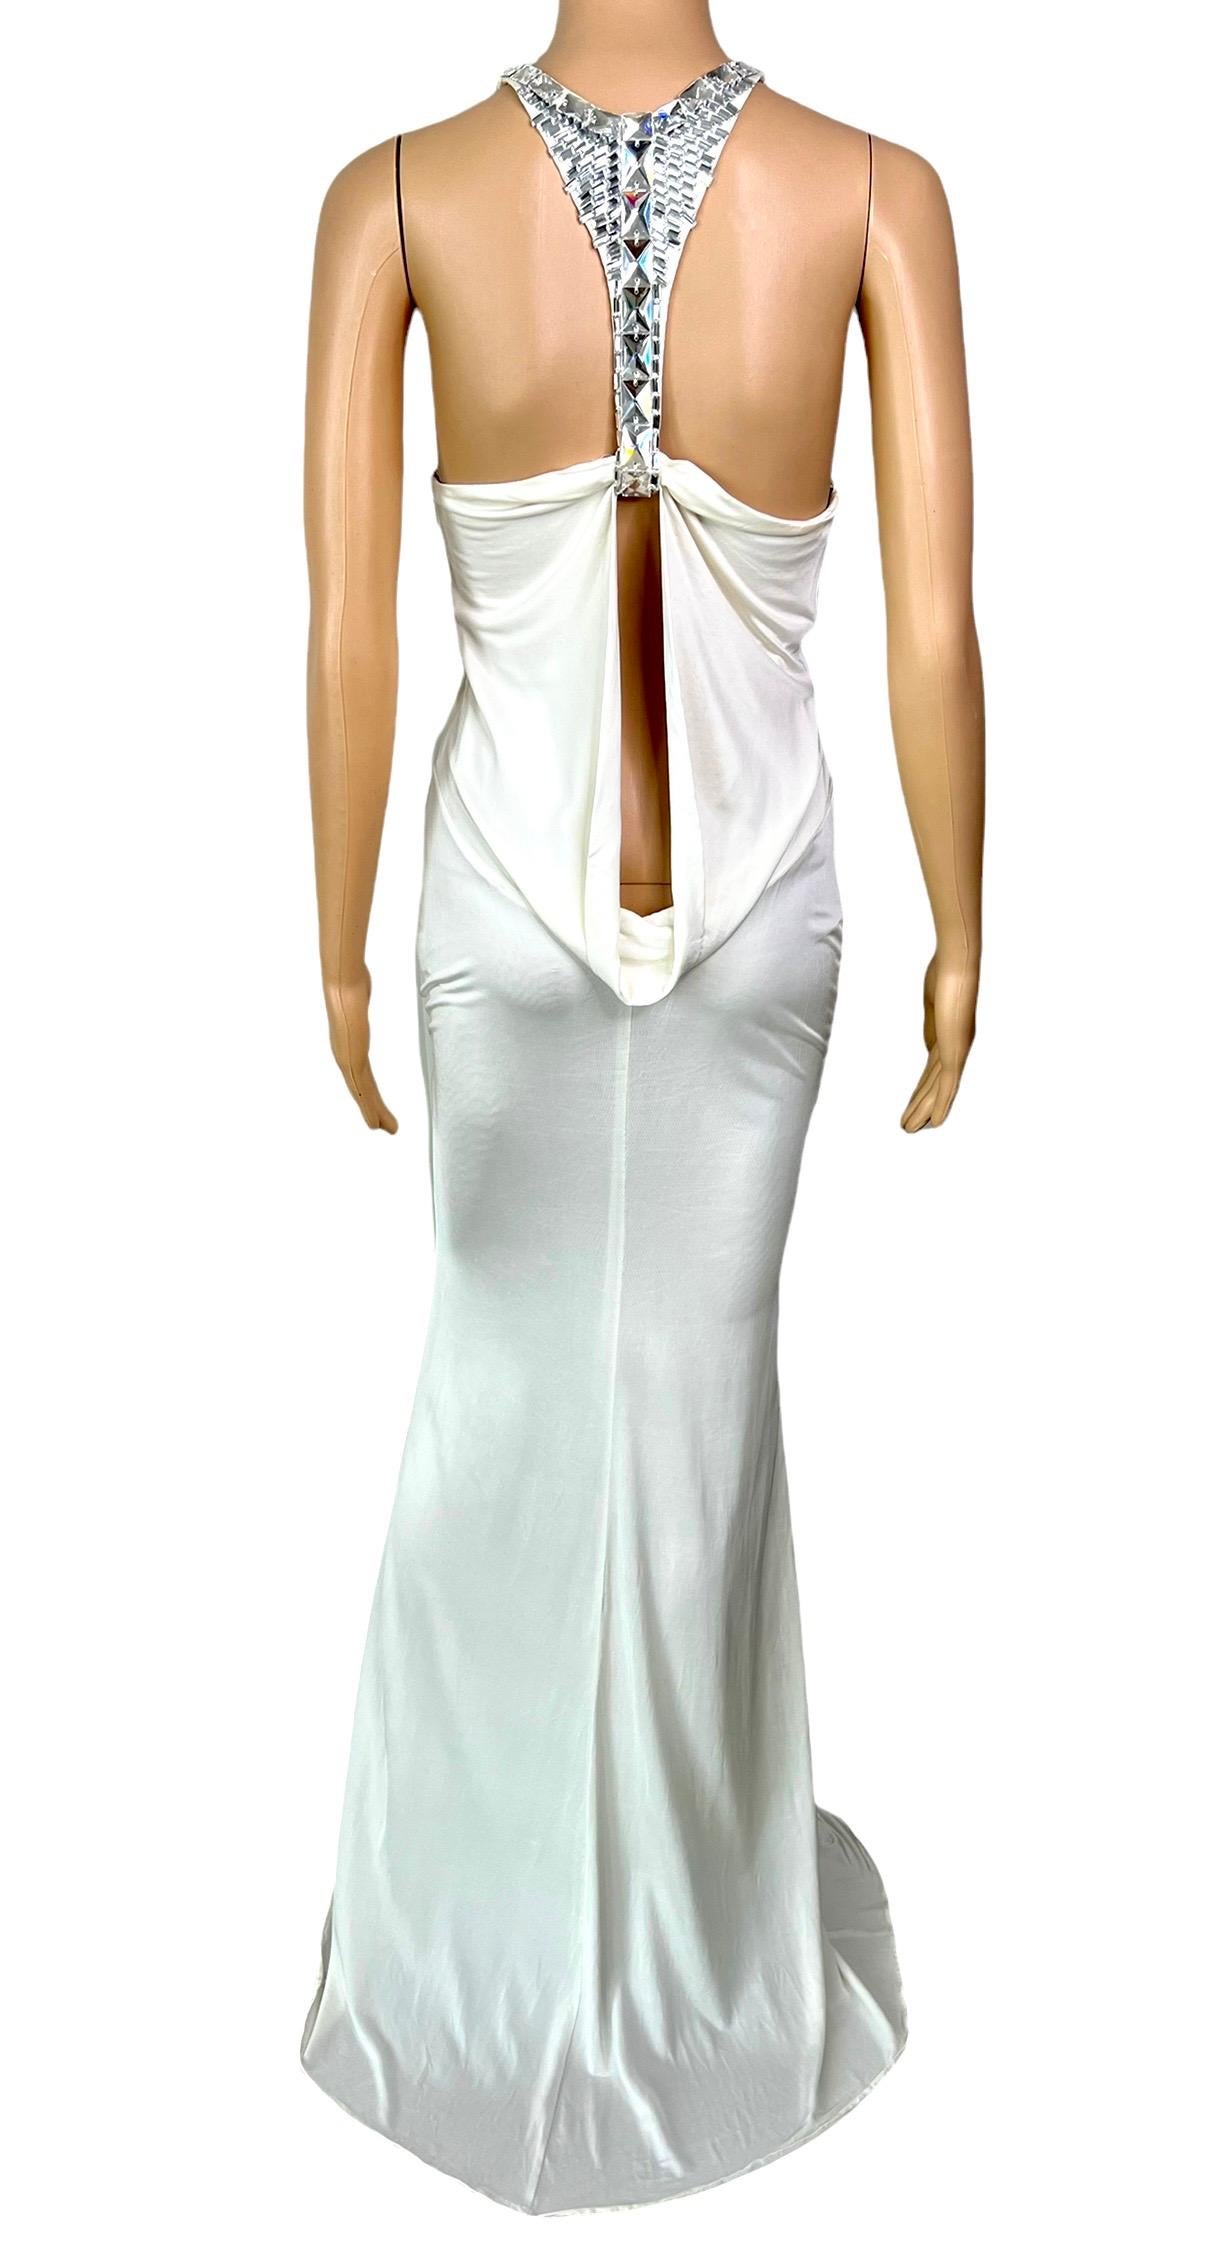 Tom Ford for Gucci F/W 2004 Embellished Plunging Cutout Ivory Evening Dress Gown For Sale 8